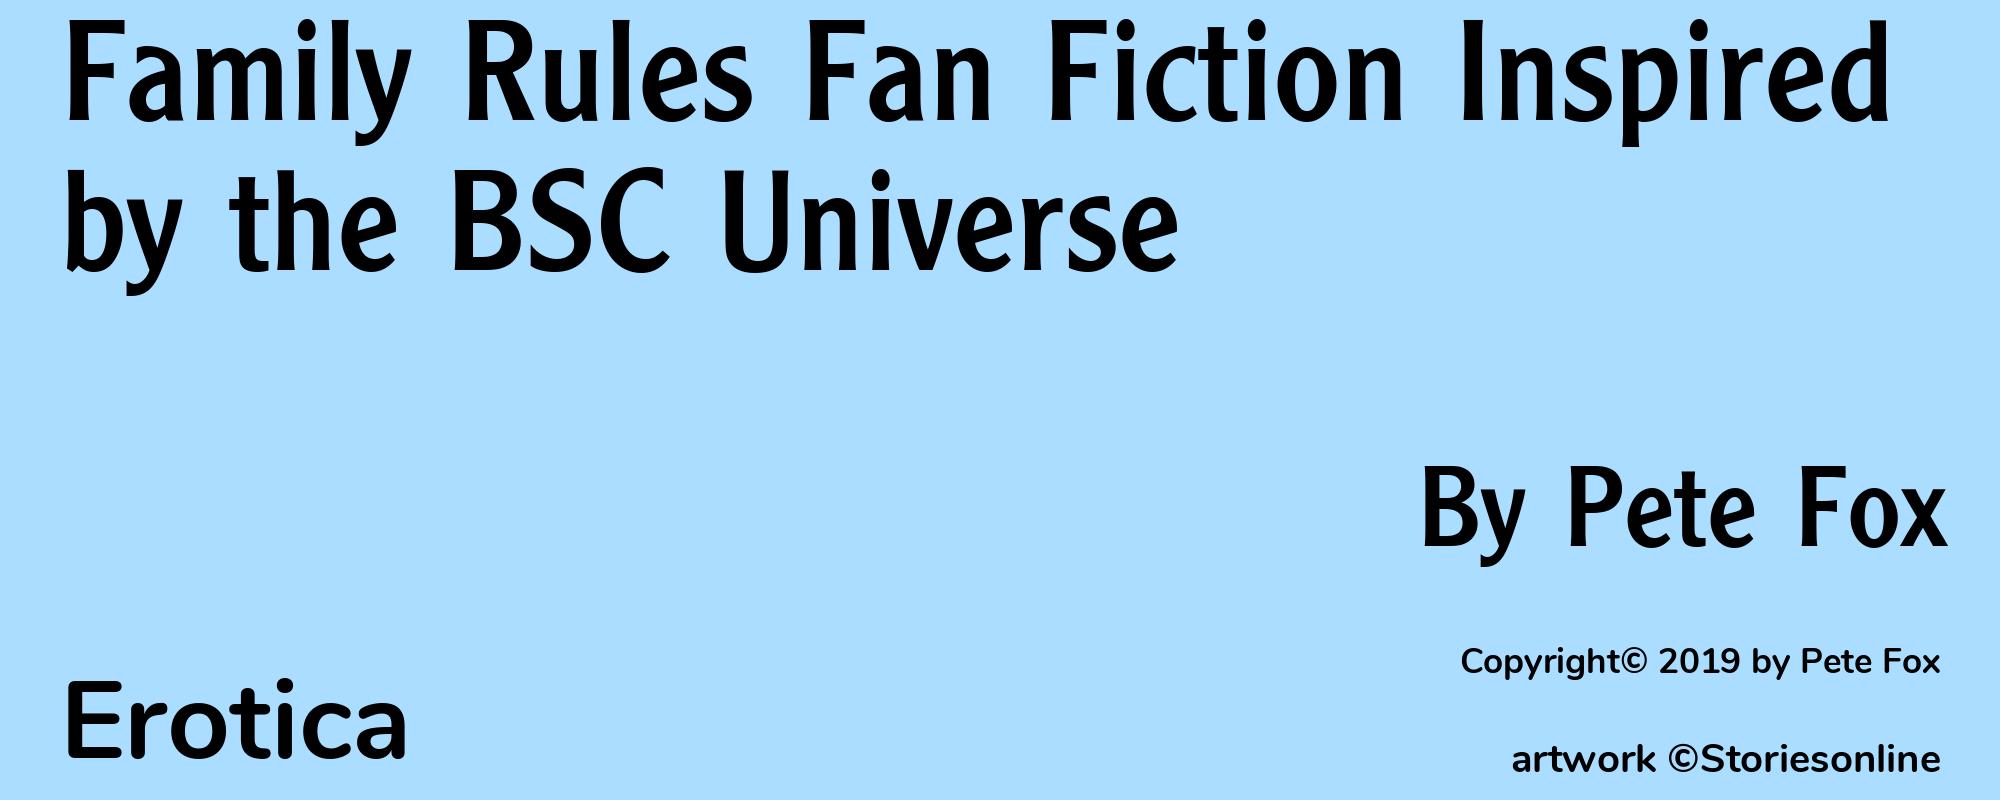 Family Rules Fan Fiction Inspired by the BSC Universe - Cover